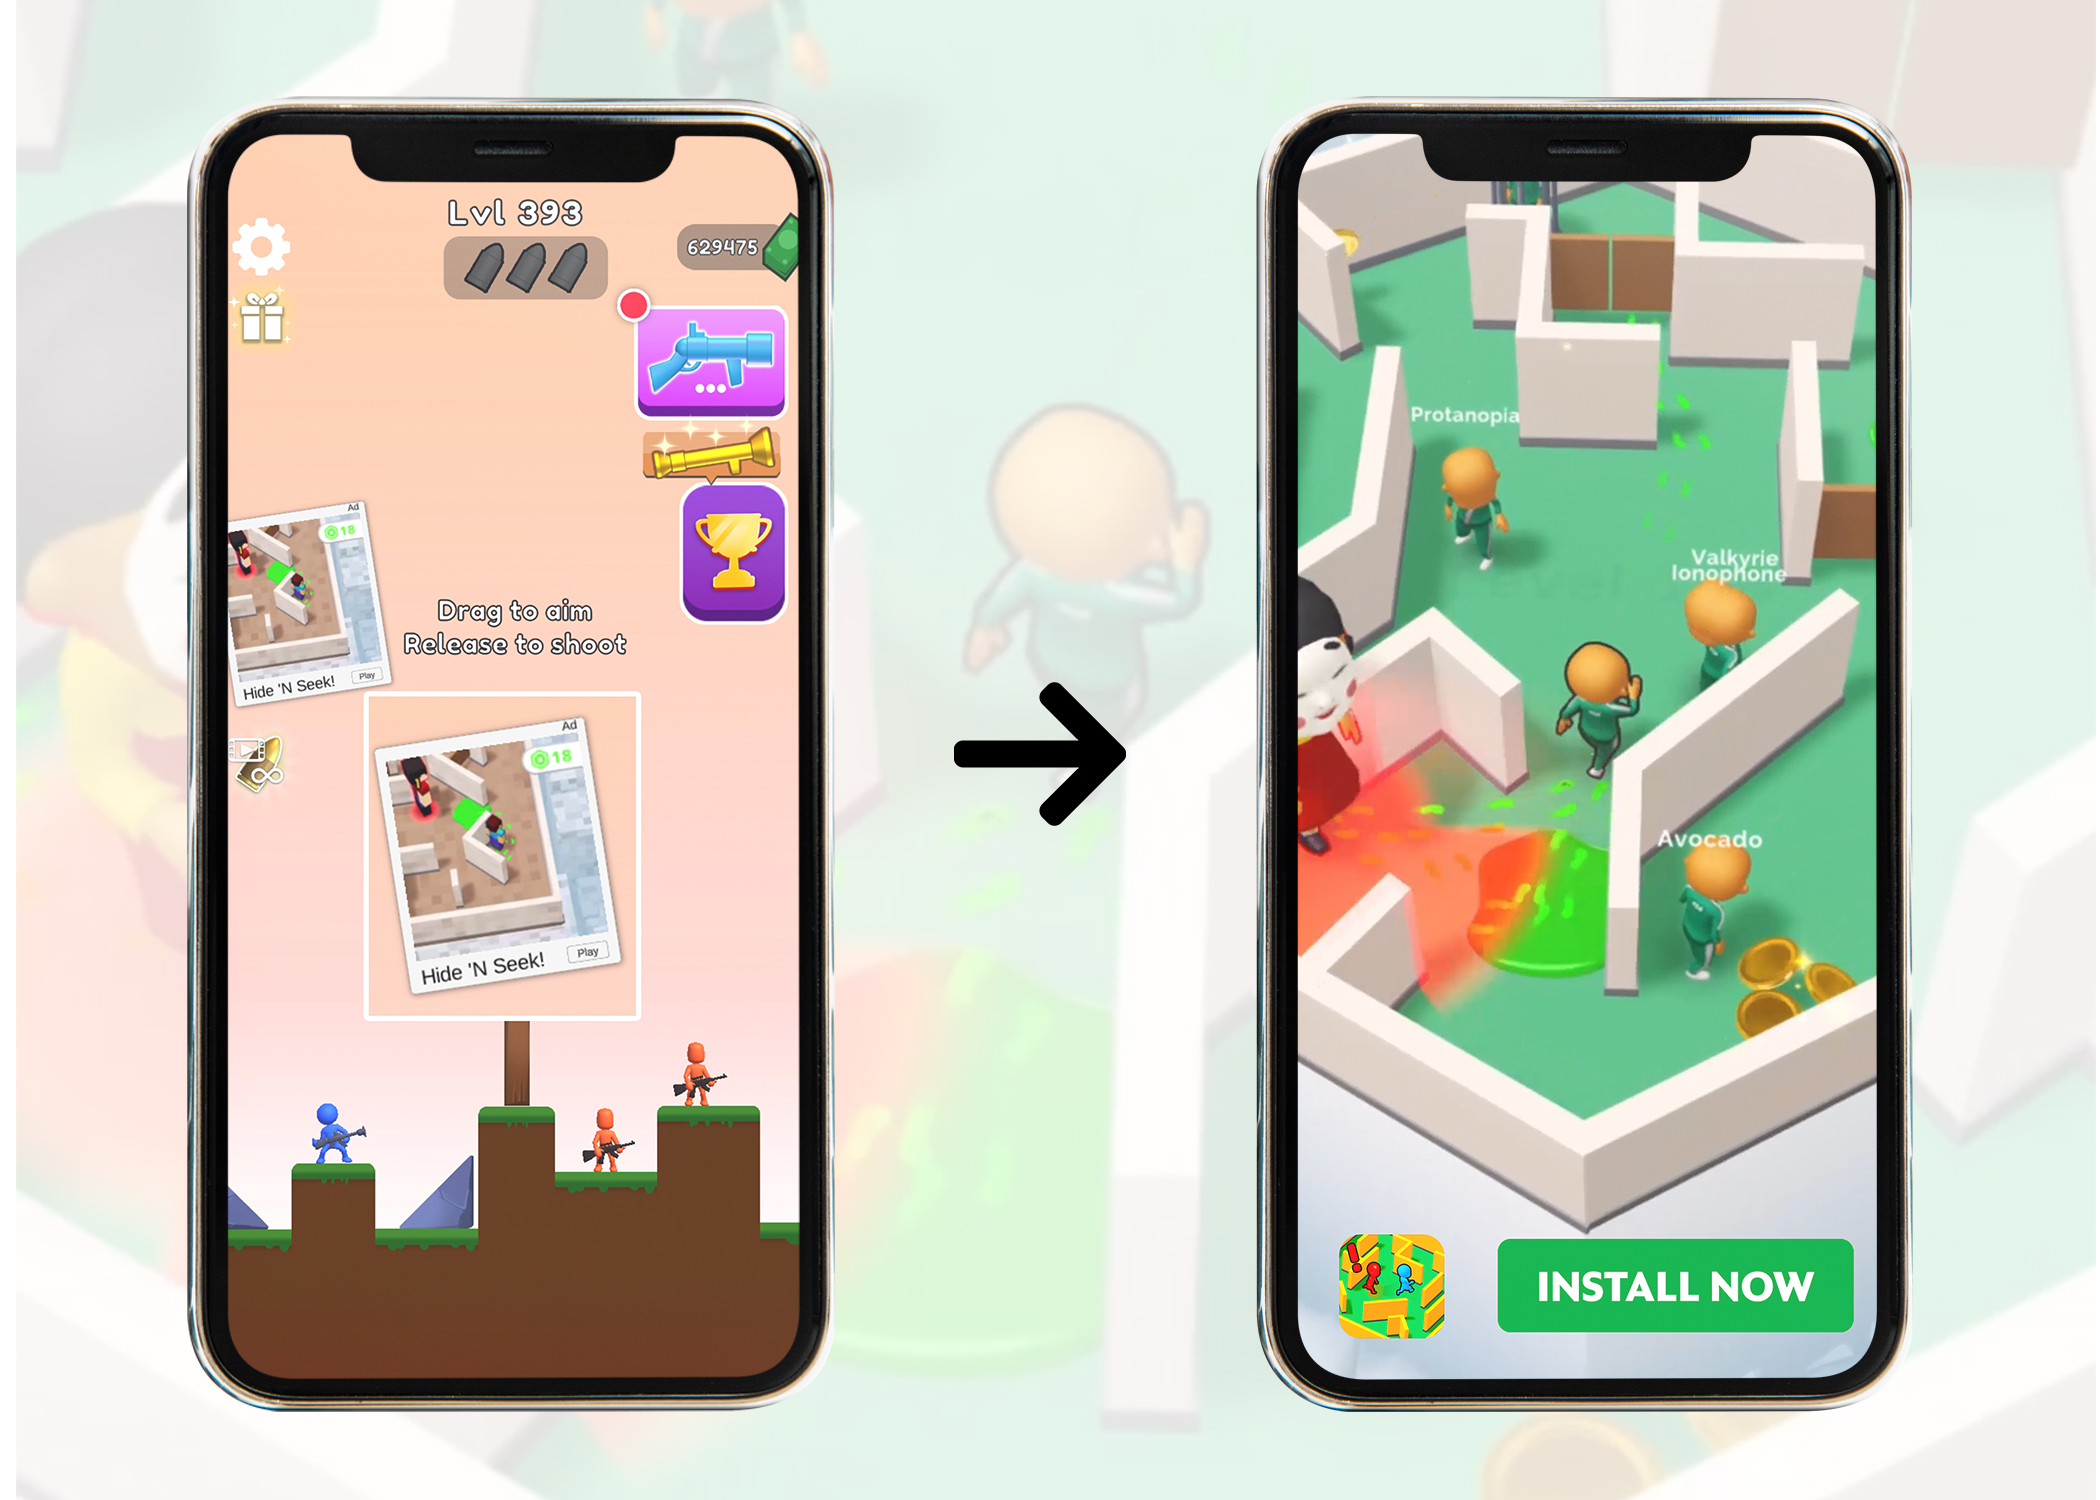 Monetization models for mobile games - Expandable ads